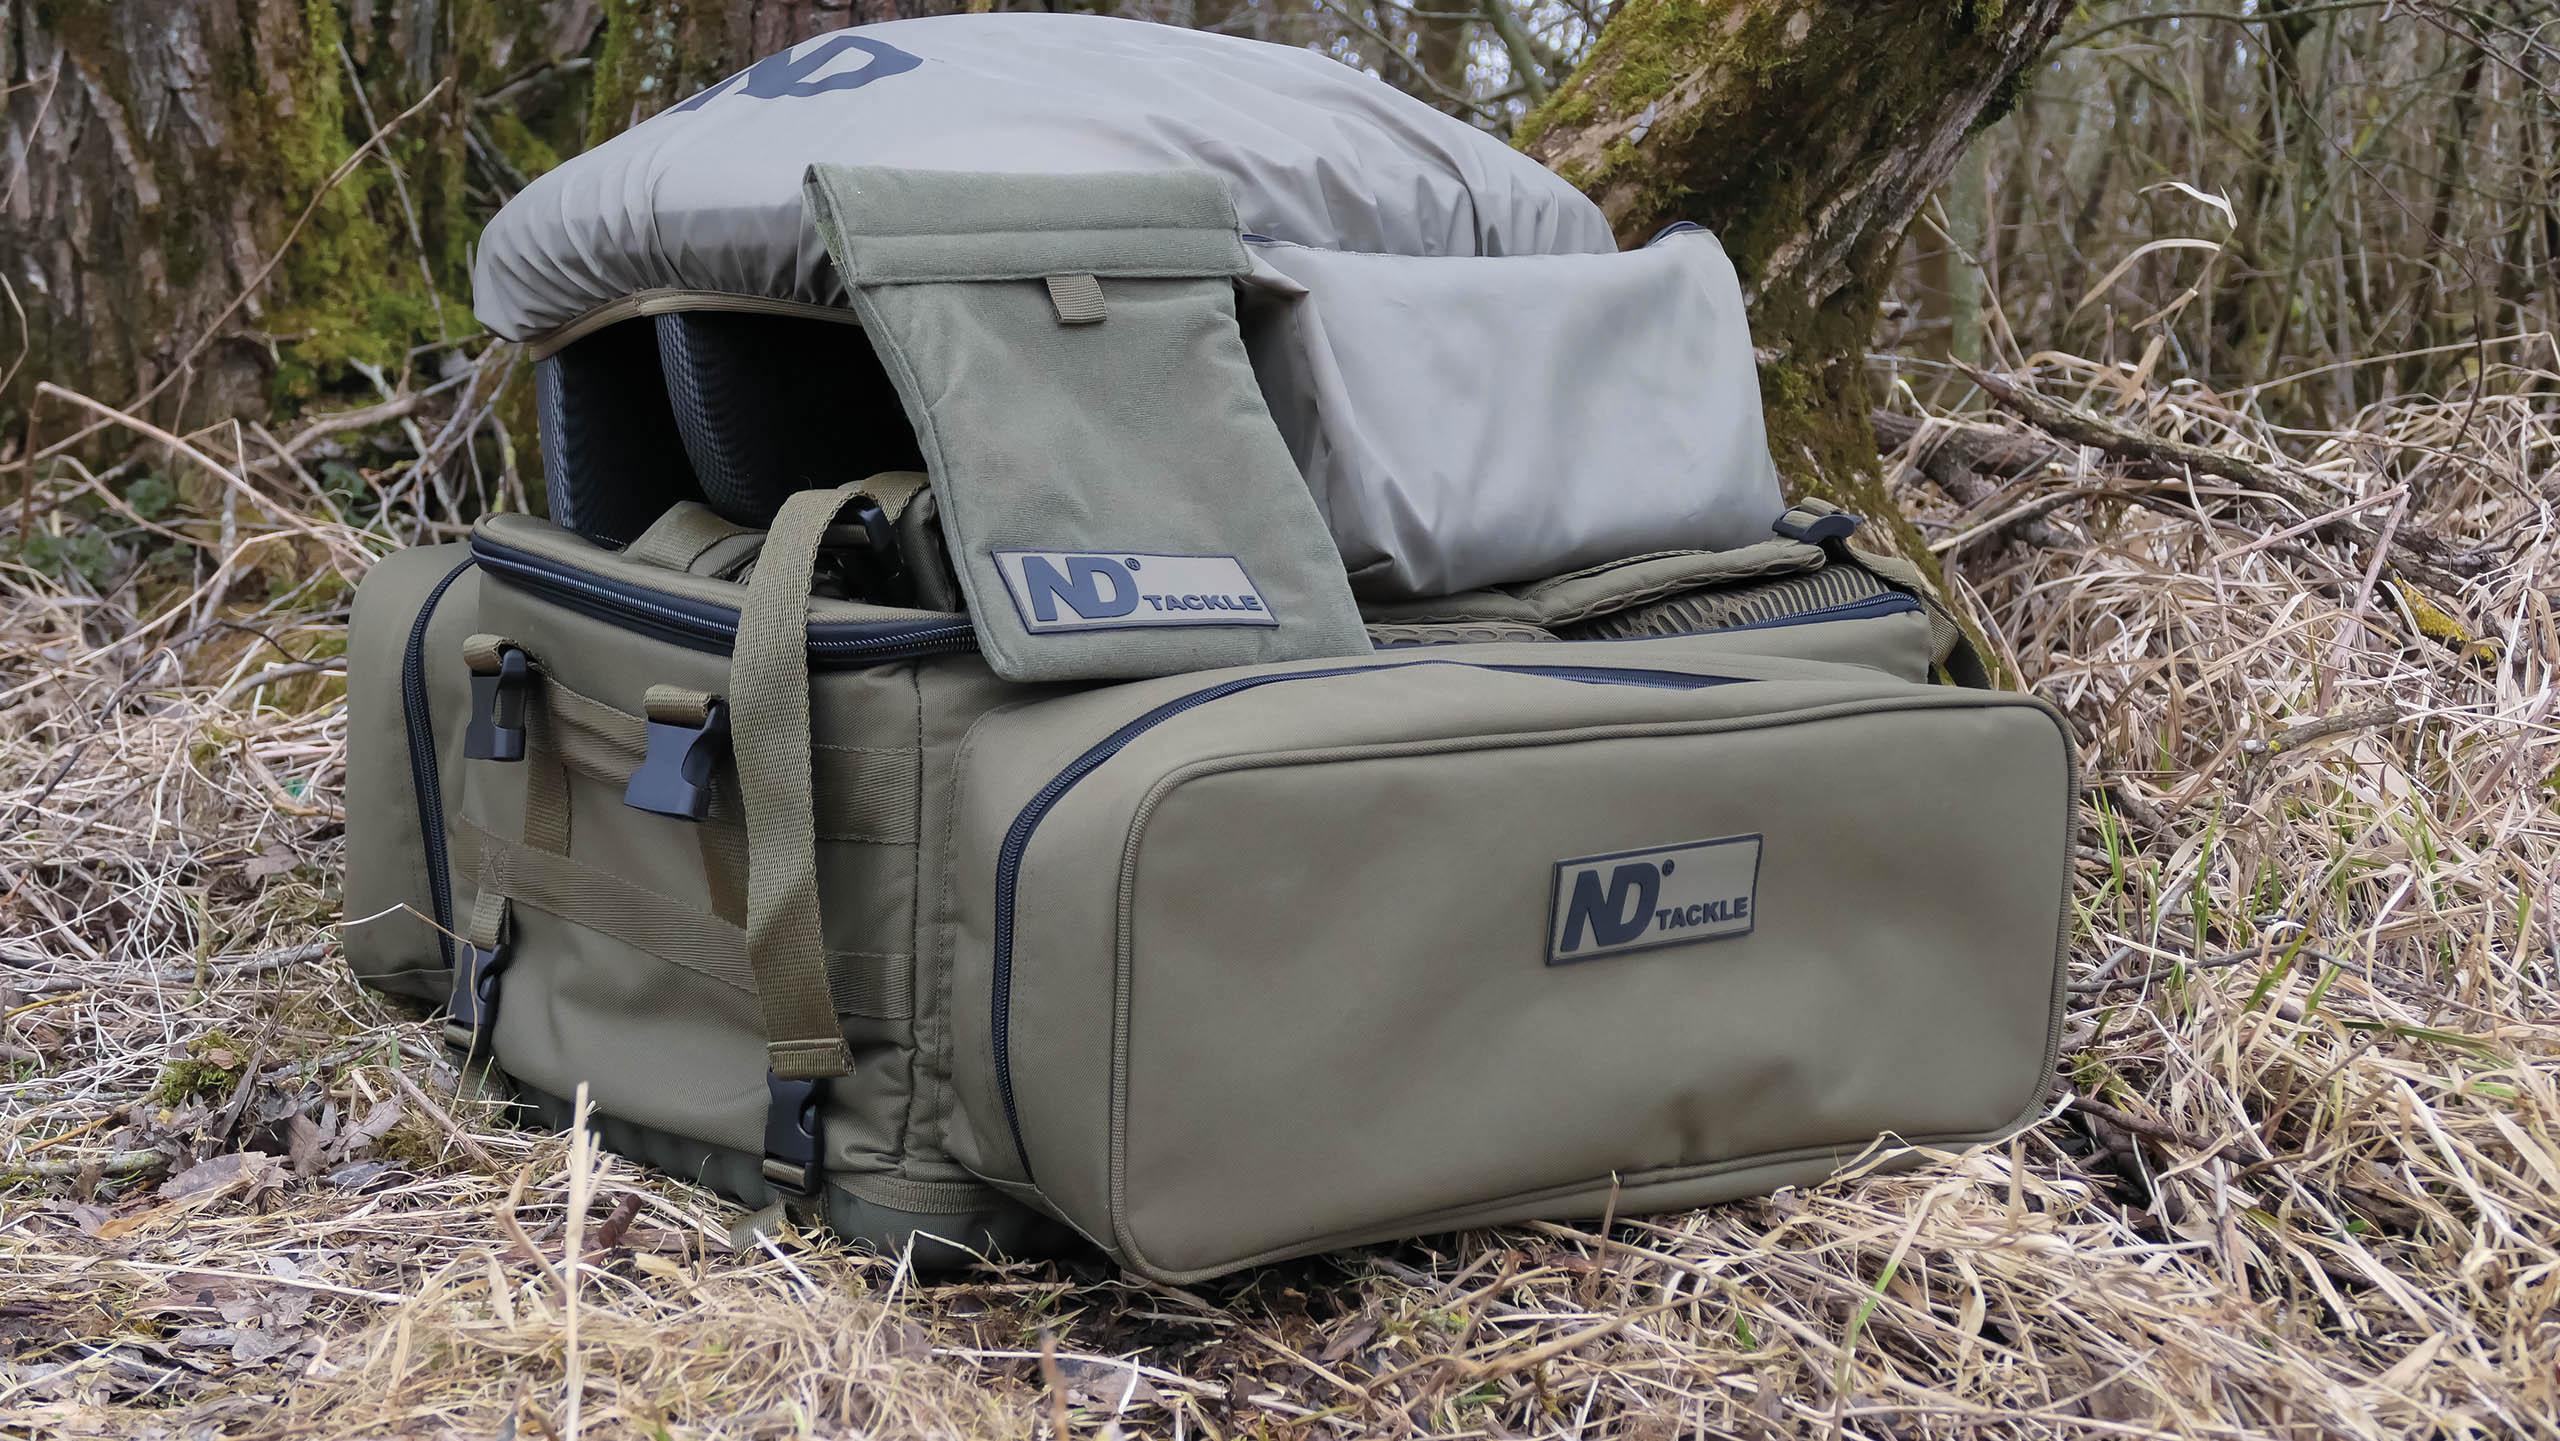 It's A New Universal Bait Boat Bag From ND